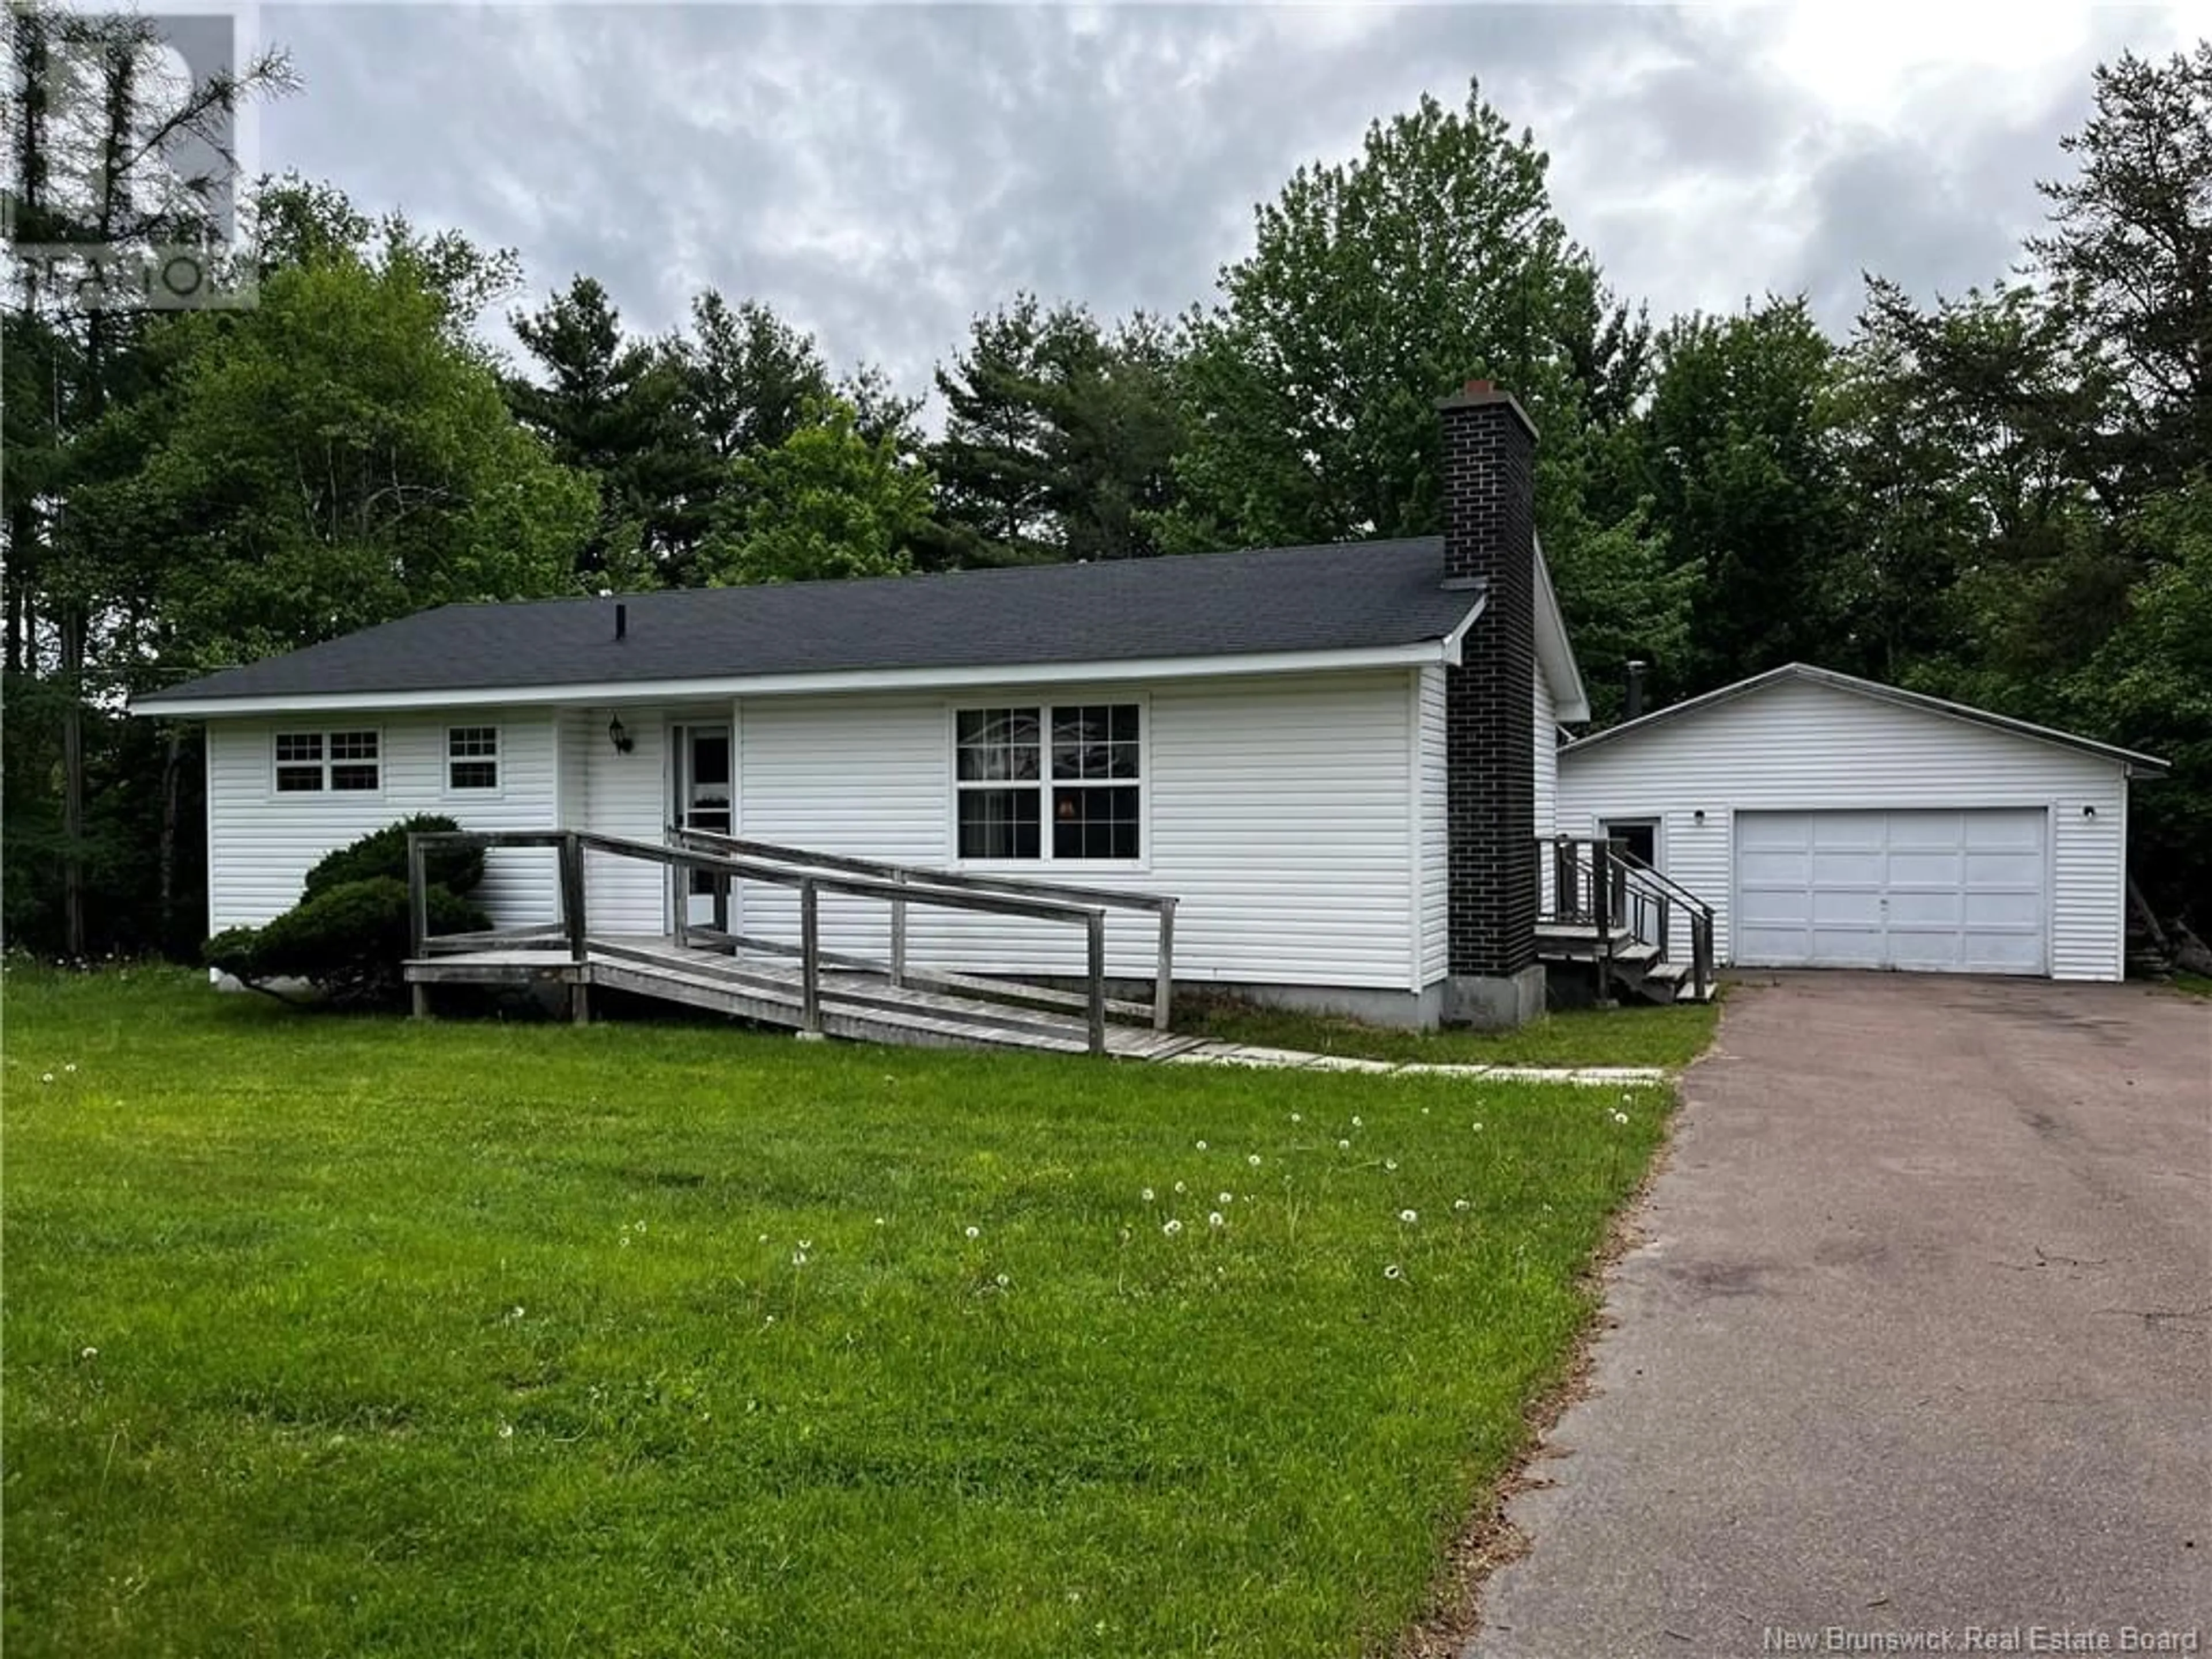 Frontside or backside of a home for 2950 Route 465, Beersville New Brunswick E4T2P6